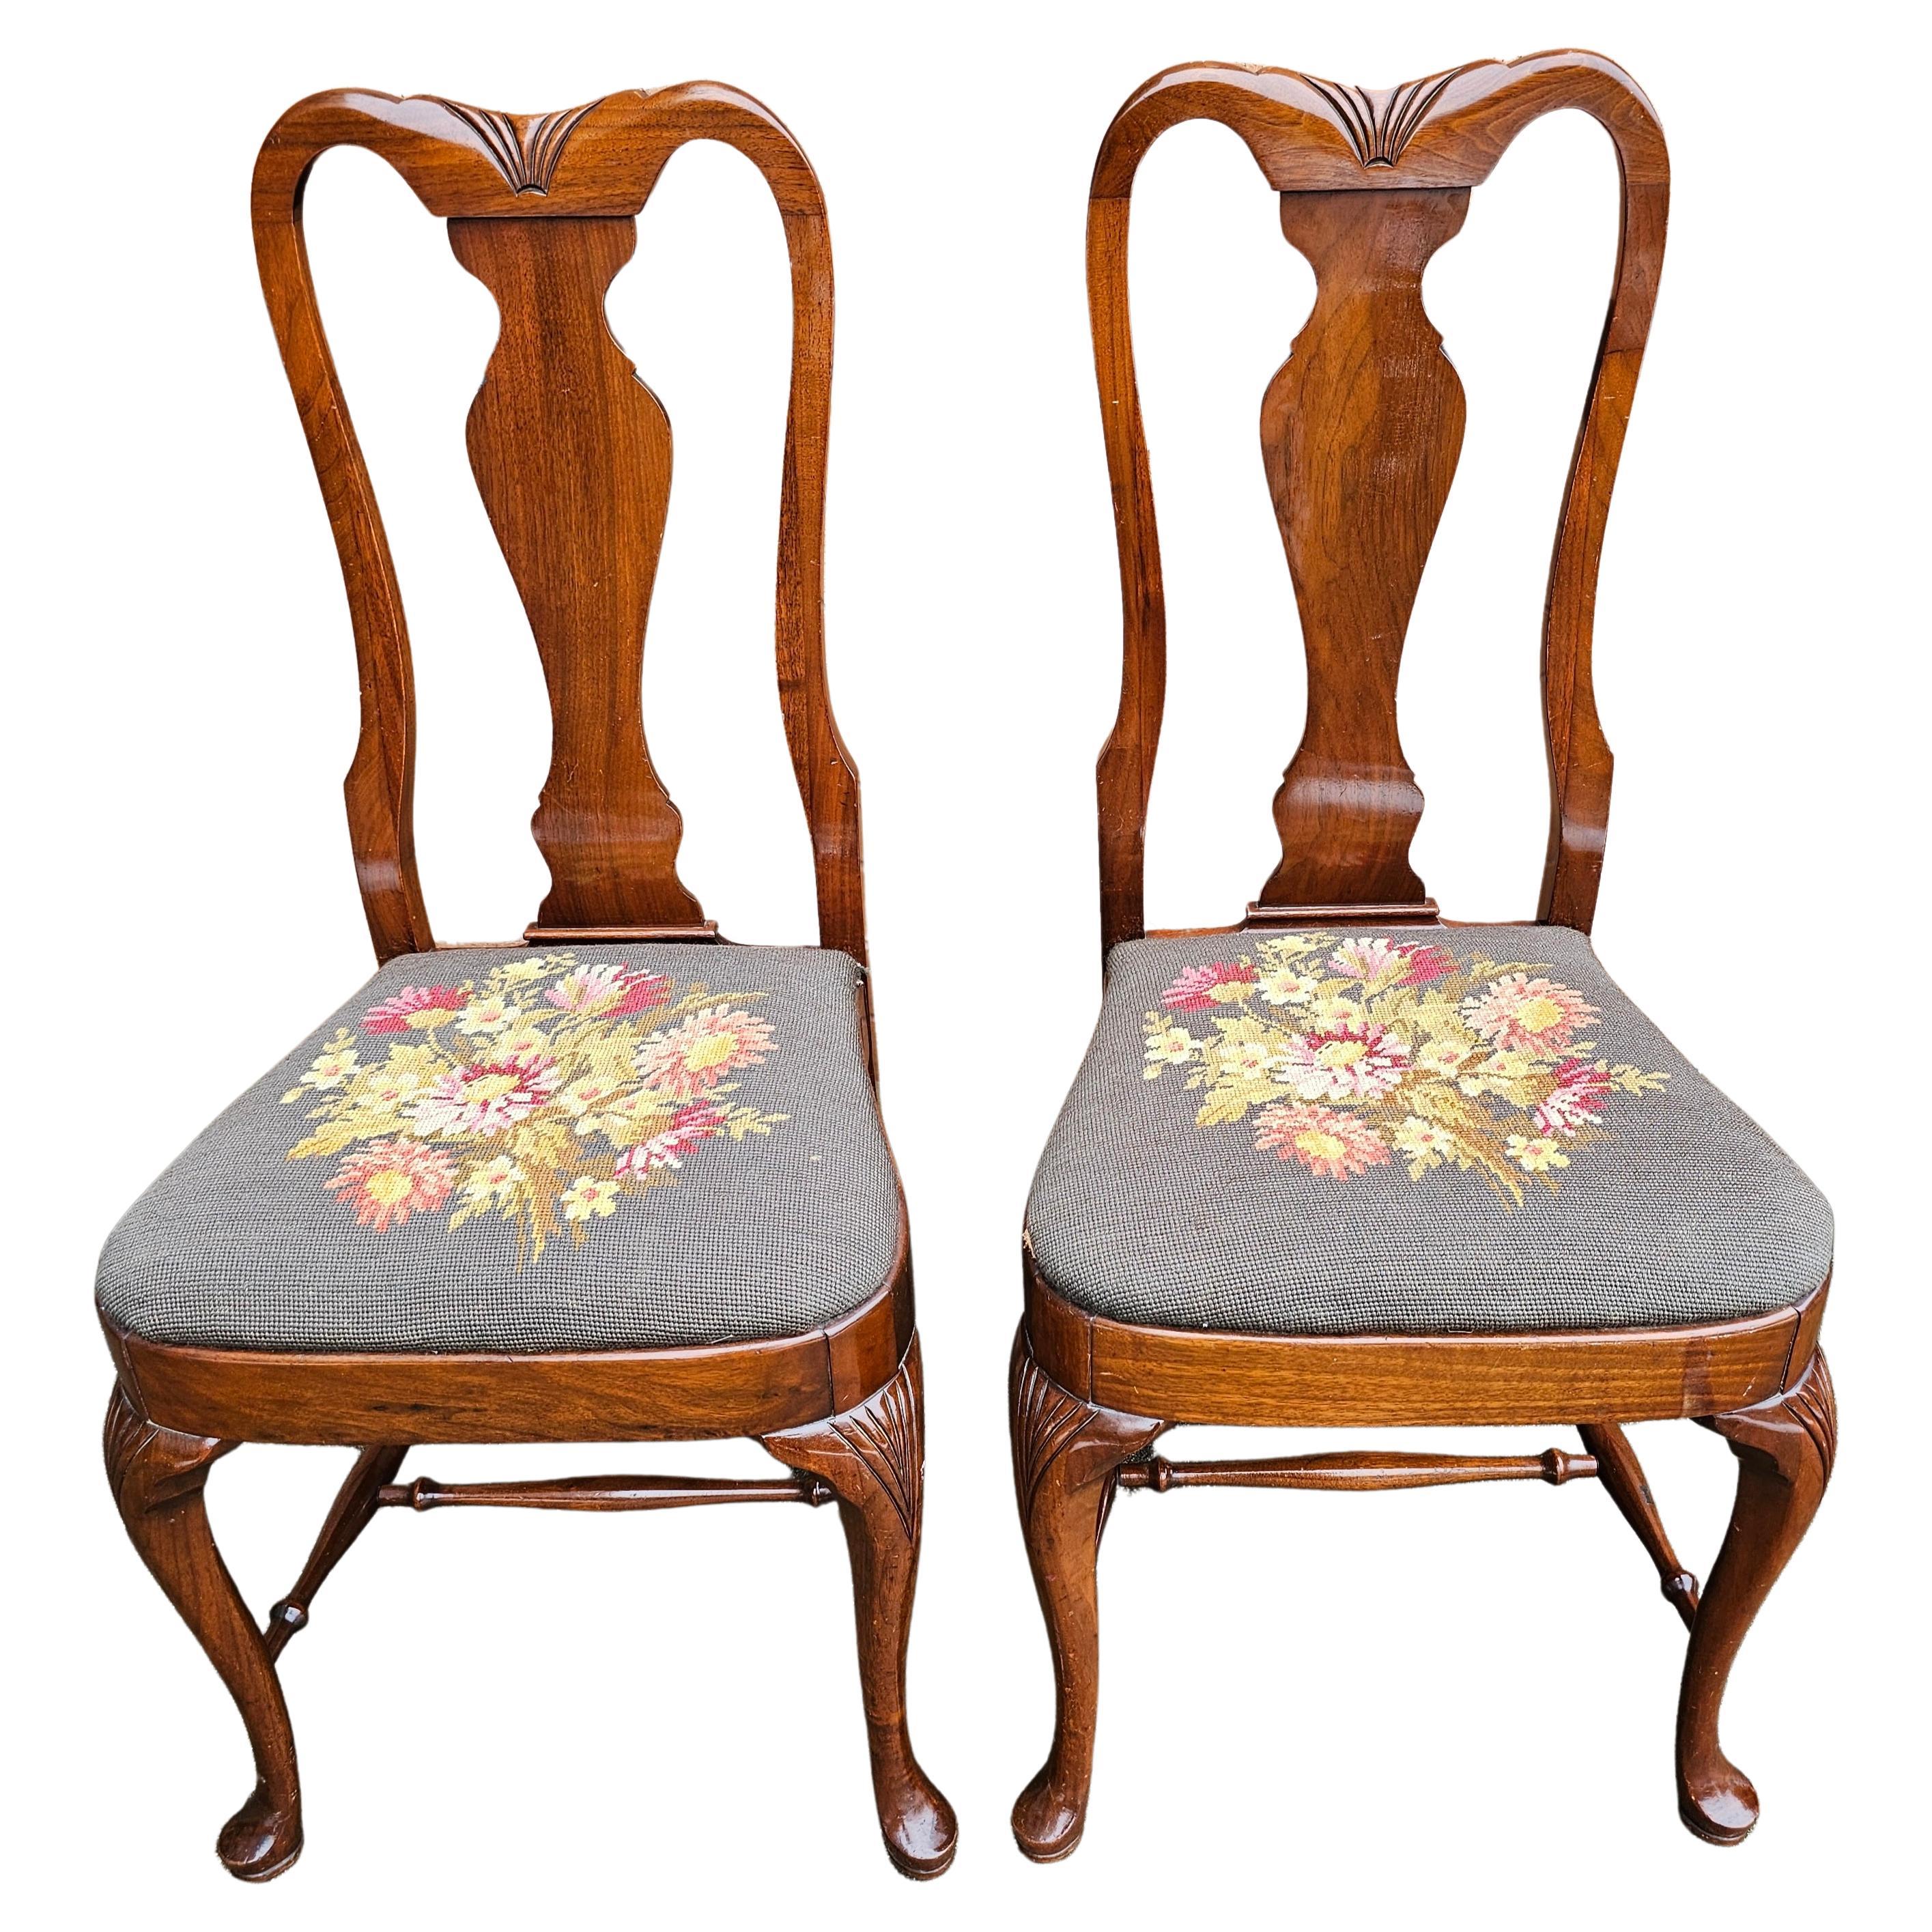 A rare pair of 19th Century Grand  Ledge Chair Company Mahogany and Needlepoint upholstered seat Dining Chairs in the Queen Anne style. Clean antique condition